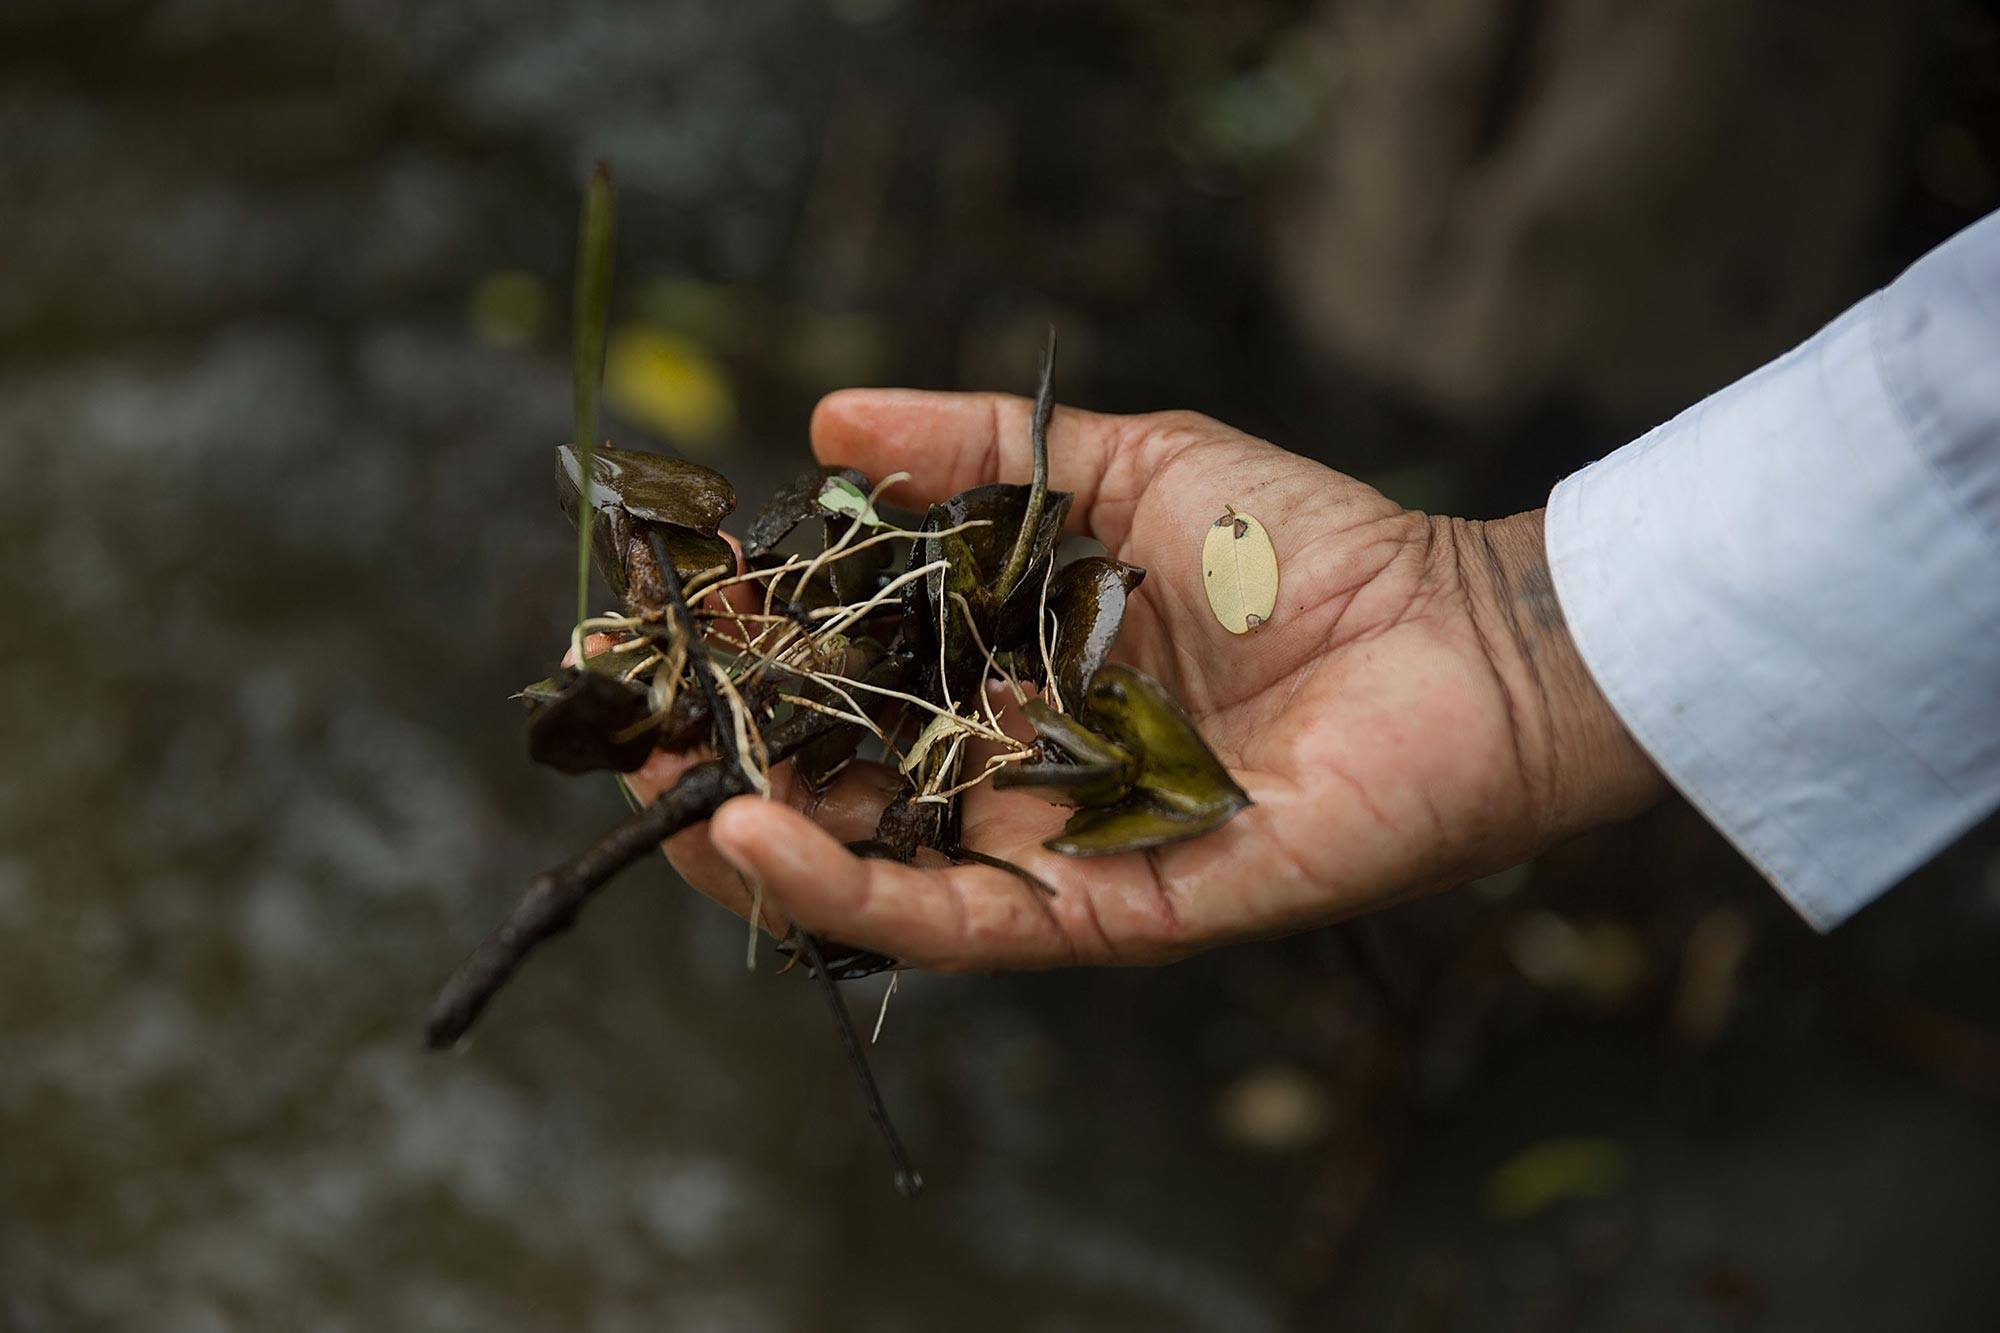 Seedlings from mangrove trees can help repopulate a mangrove forest if the area is left alone. (Image: Taylor Weidman)